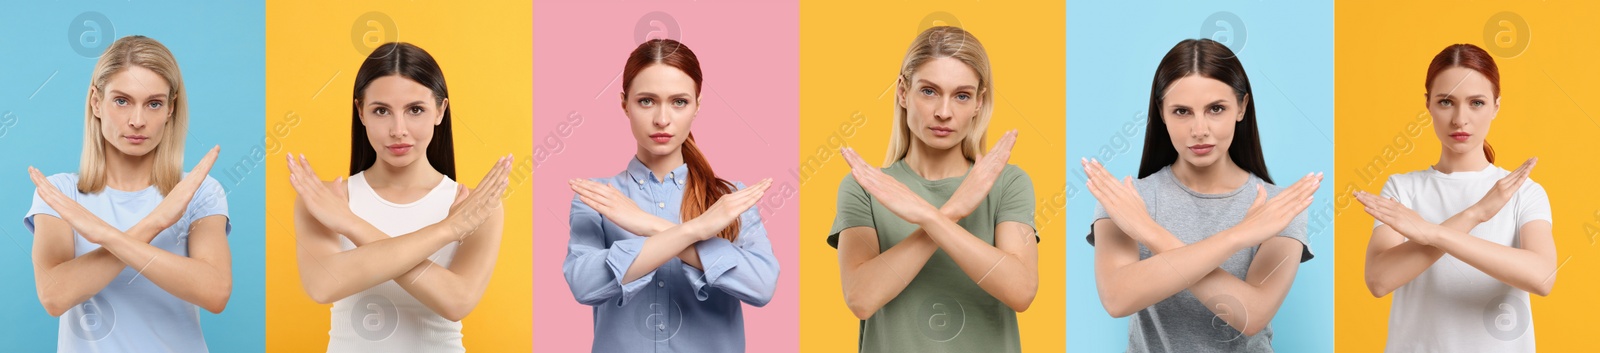 Image of Women showing stop gesture on different color backgrounds. Collage with photos